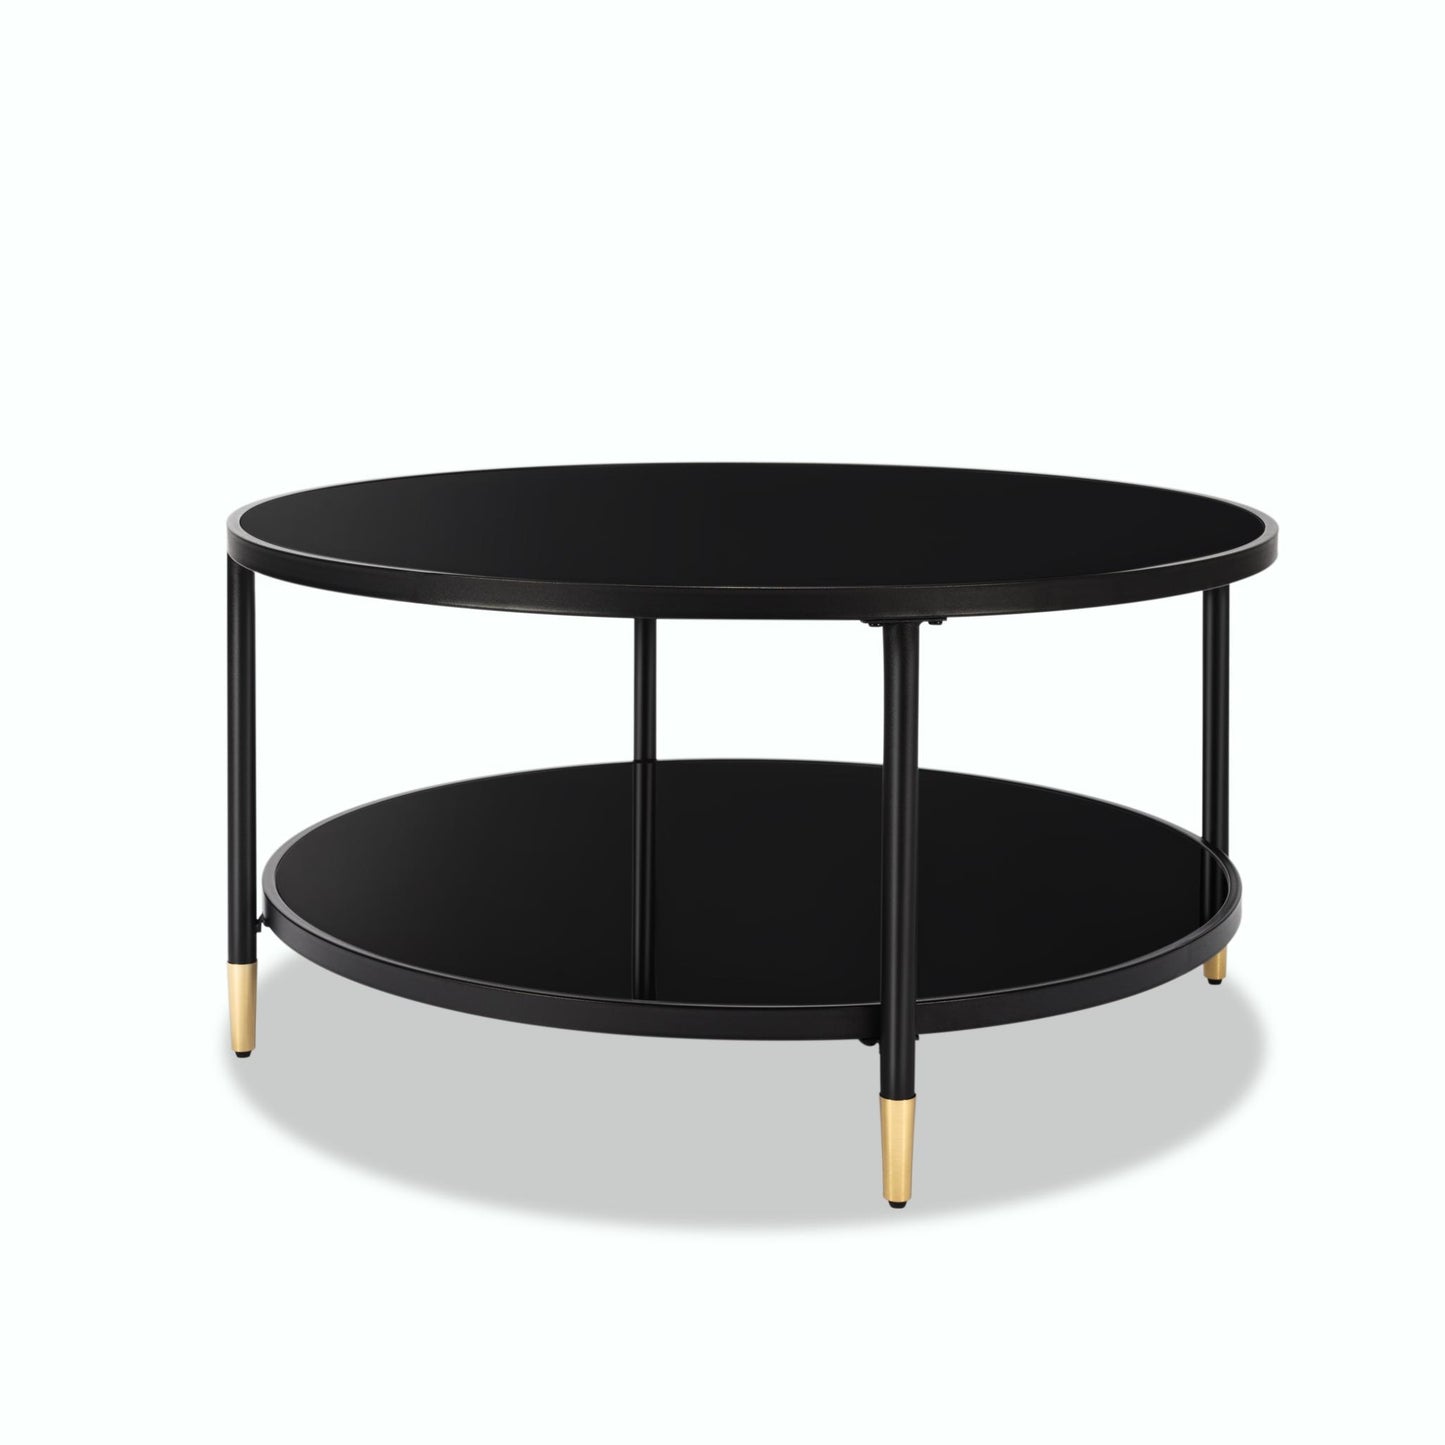 35.4” Round Coffee Table